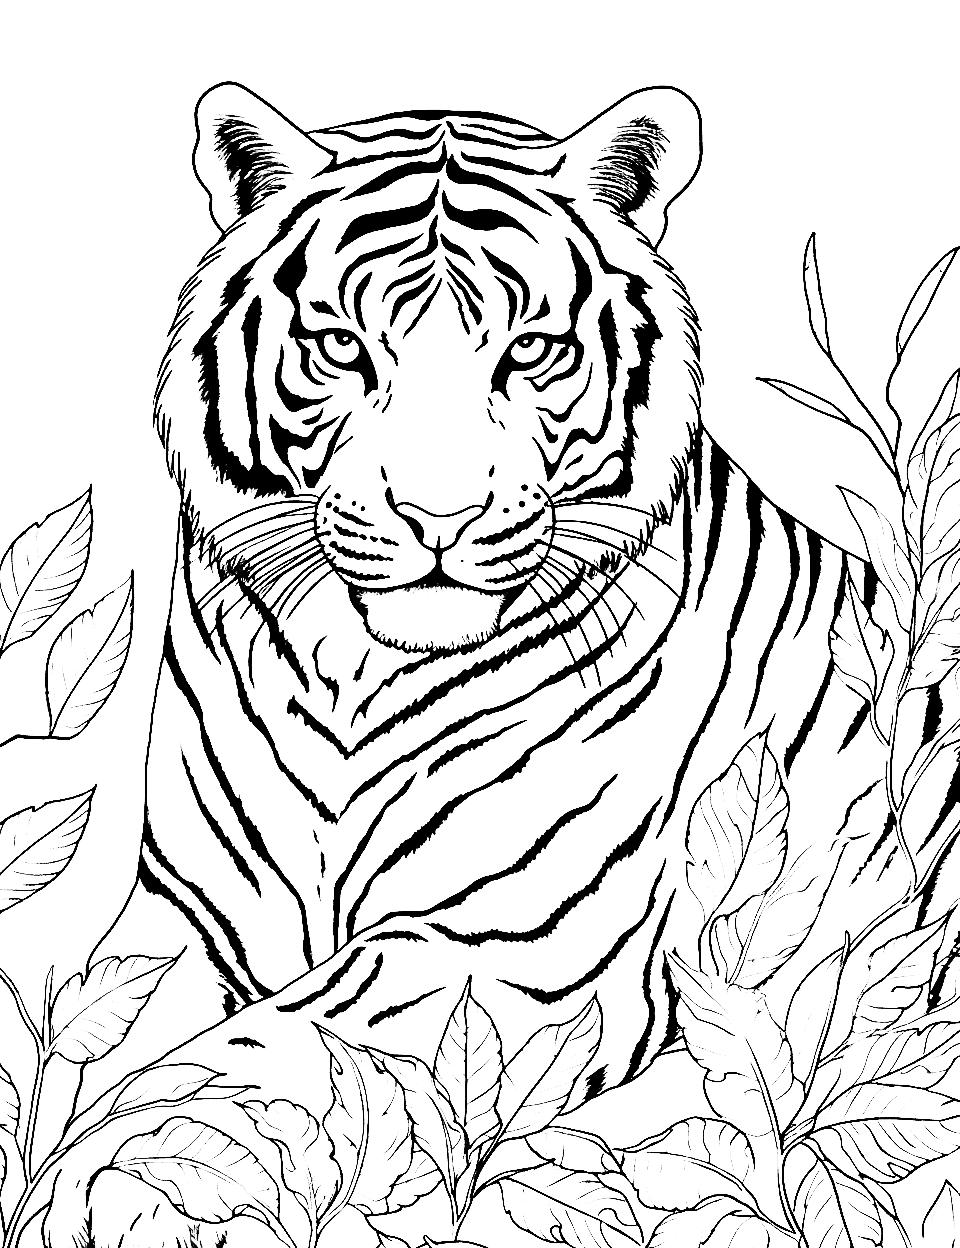 Golden Tiger Amidst Gold Coloring Page - The rare golden tiger, lying on a bed of golden leaves.